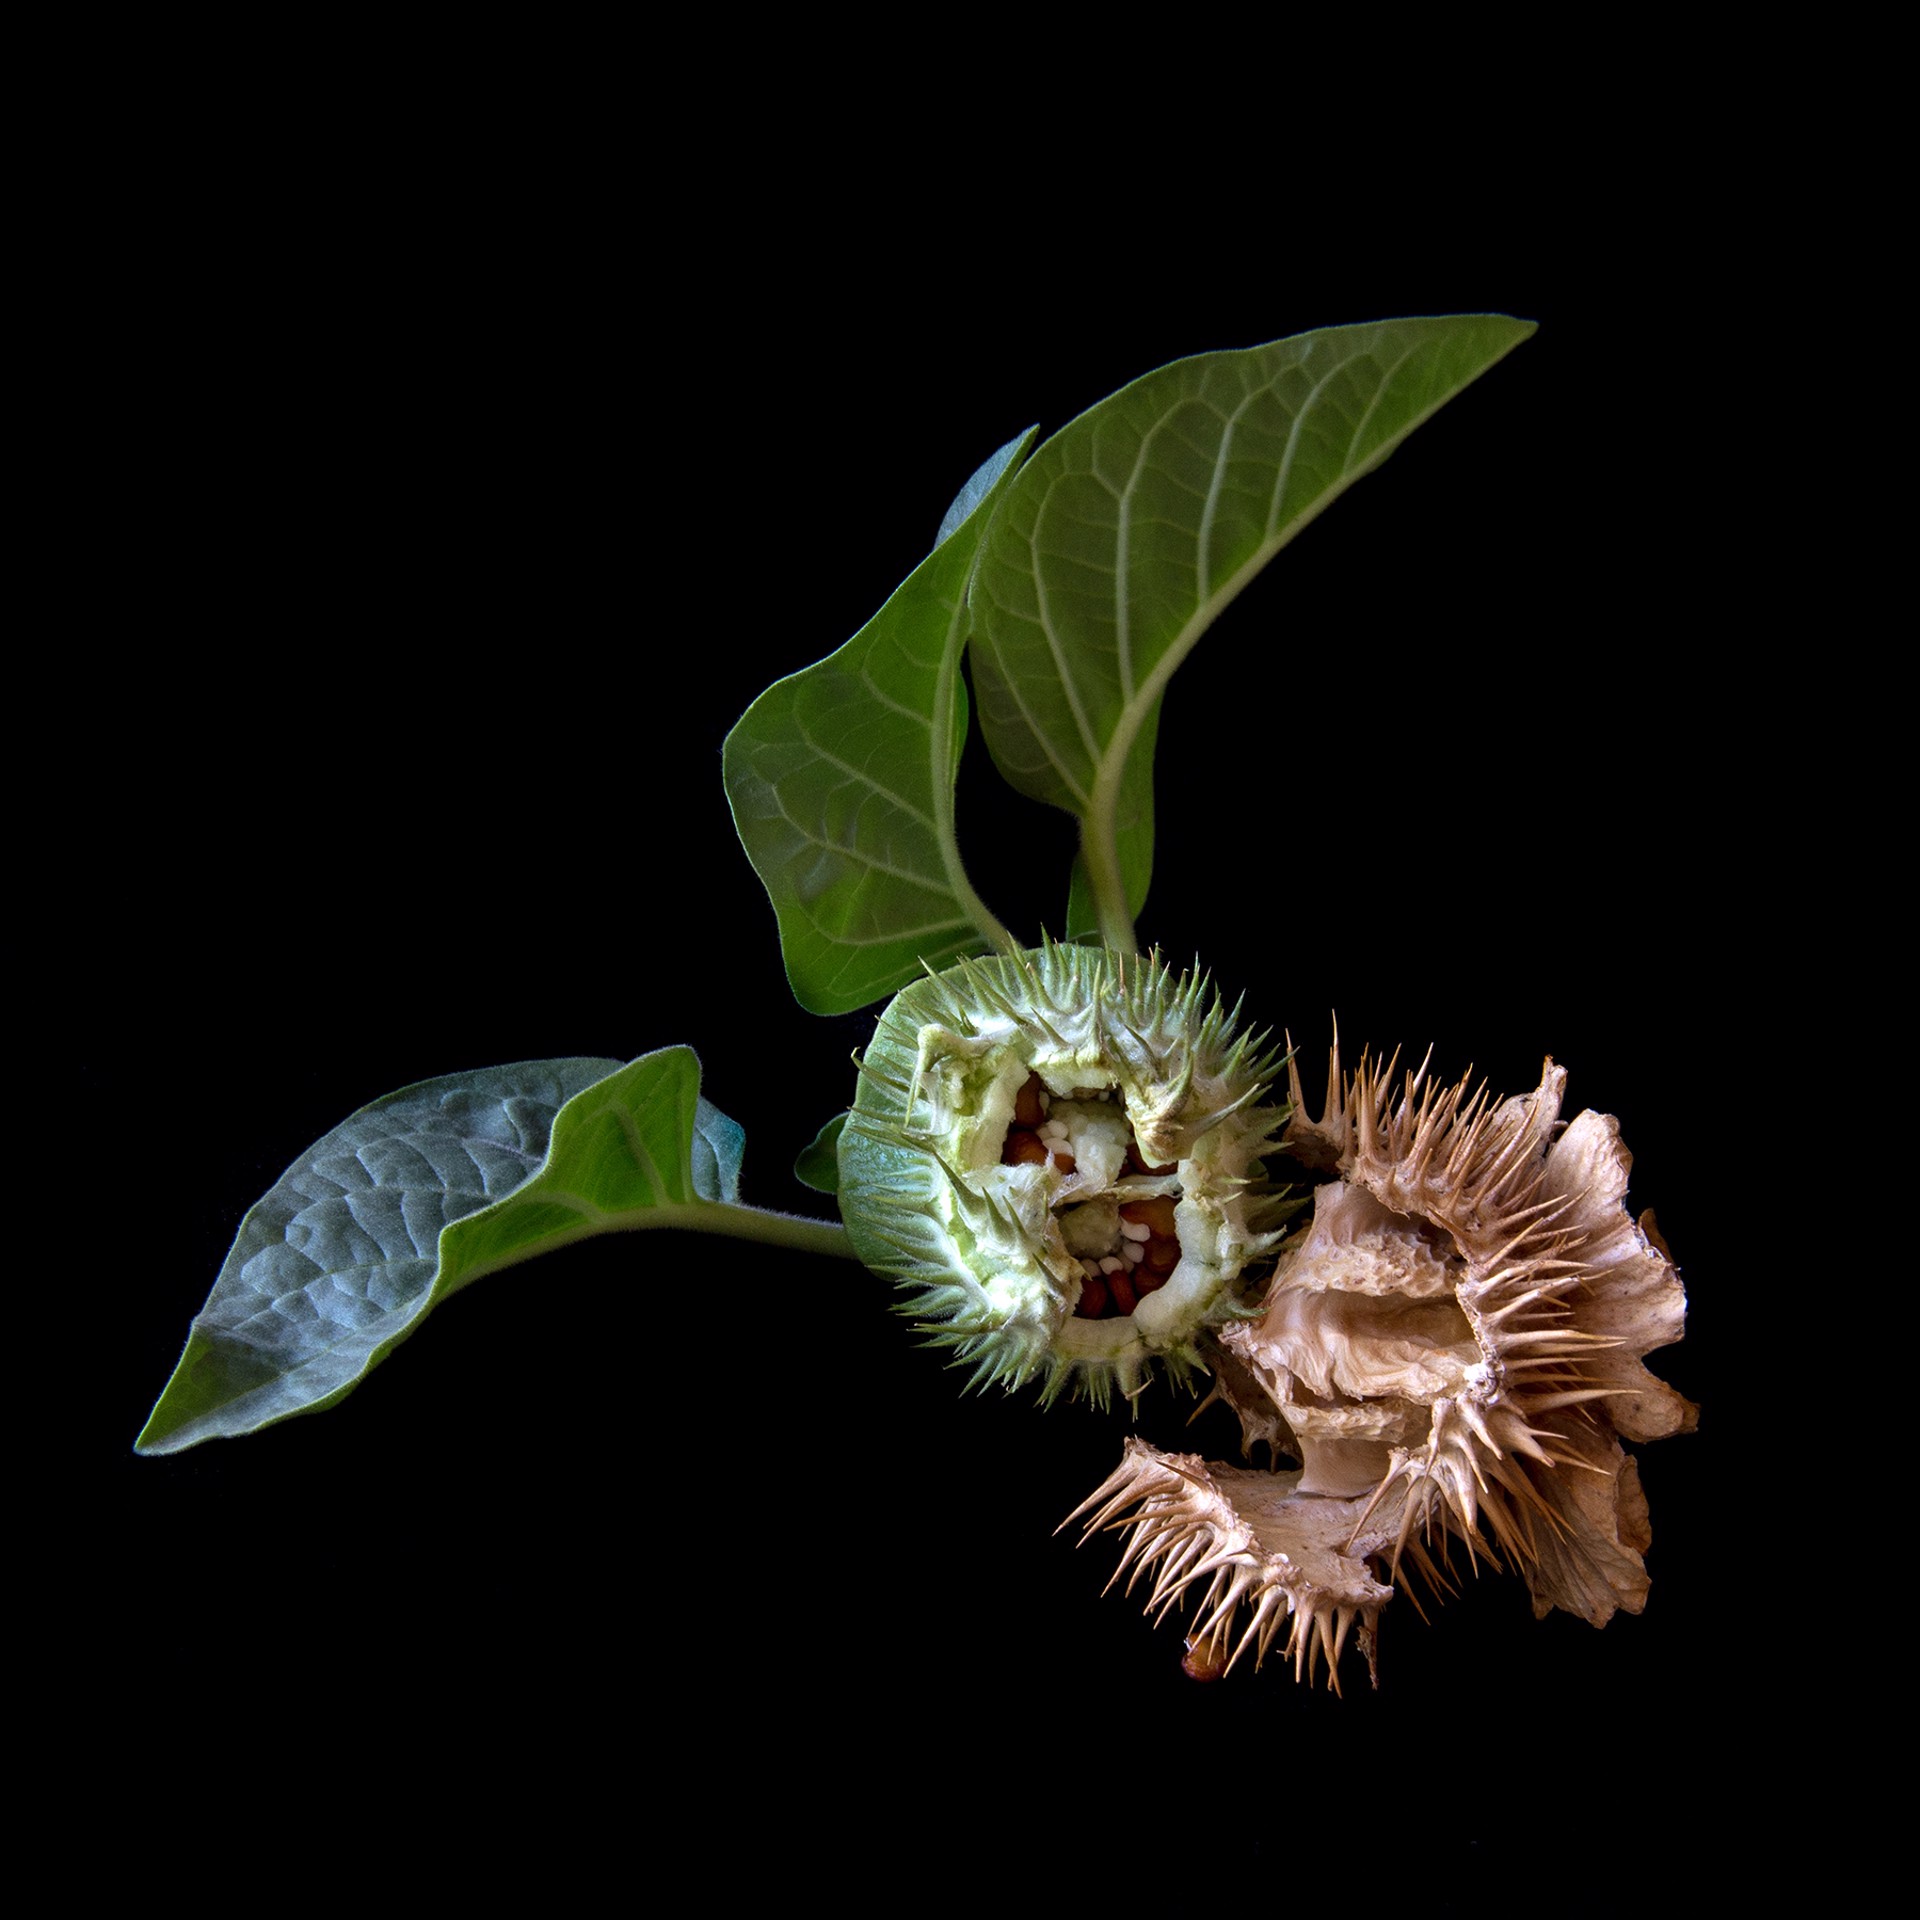 Datura Seed Pod, 5731 by Molly Wood